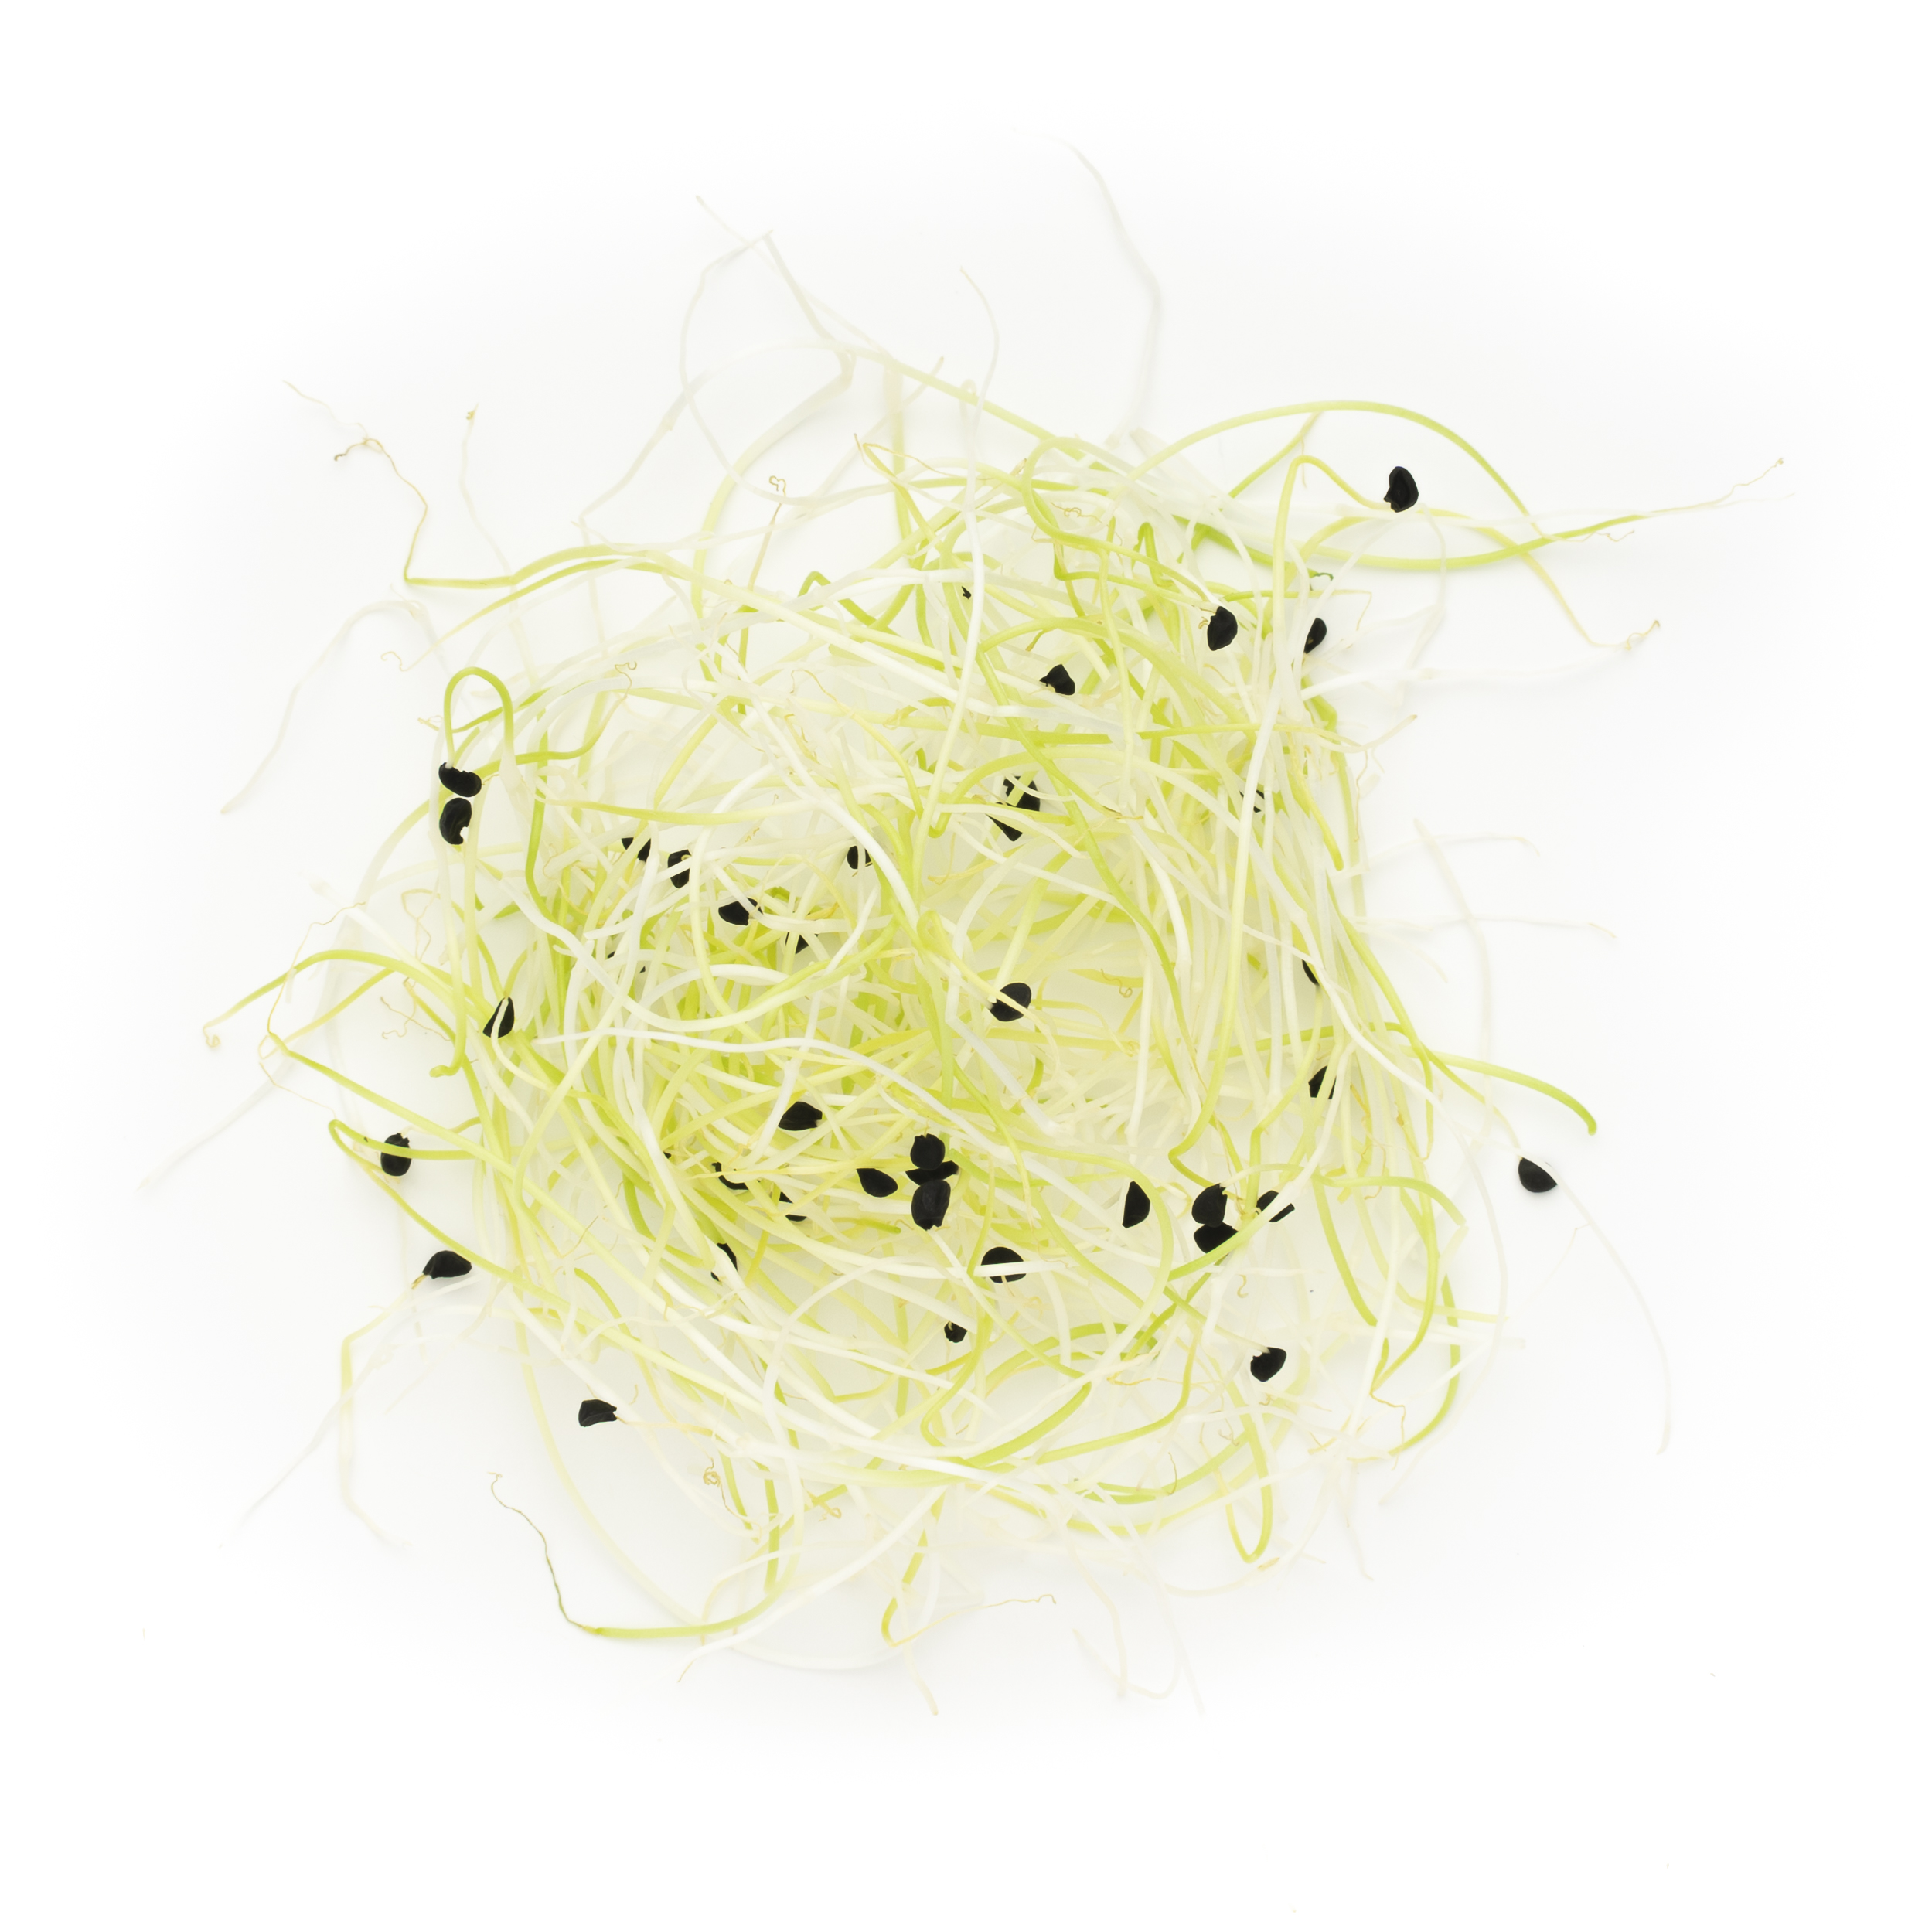 Small pile of leek sprouts on white background